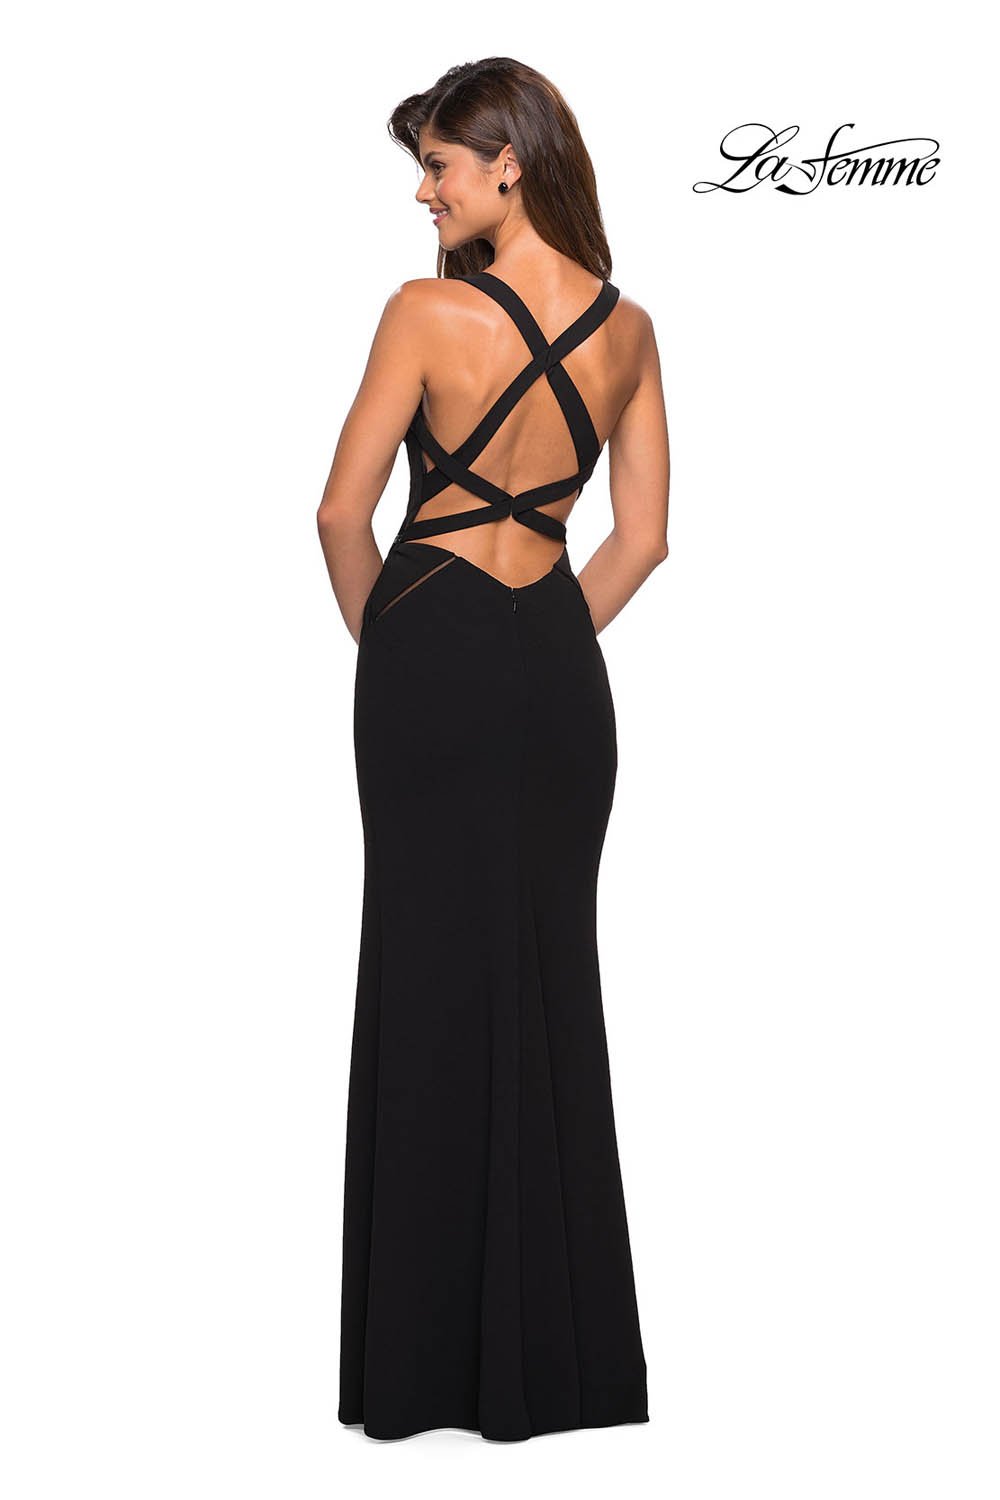 La Femme 27538 dress images in these colors: Black, Forest Green, White.